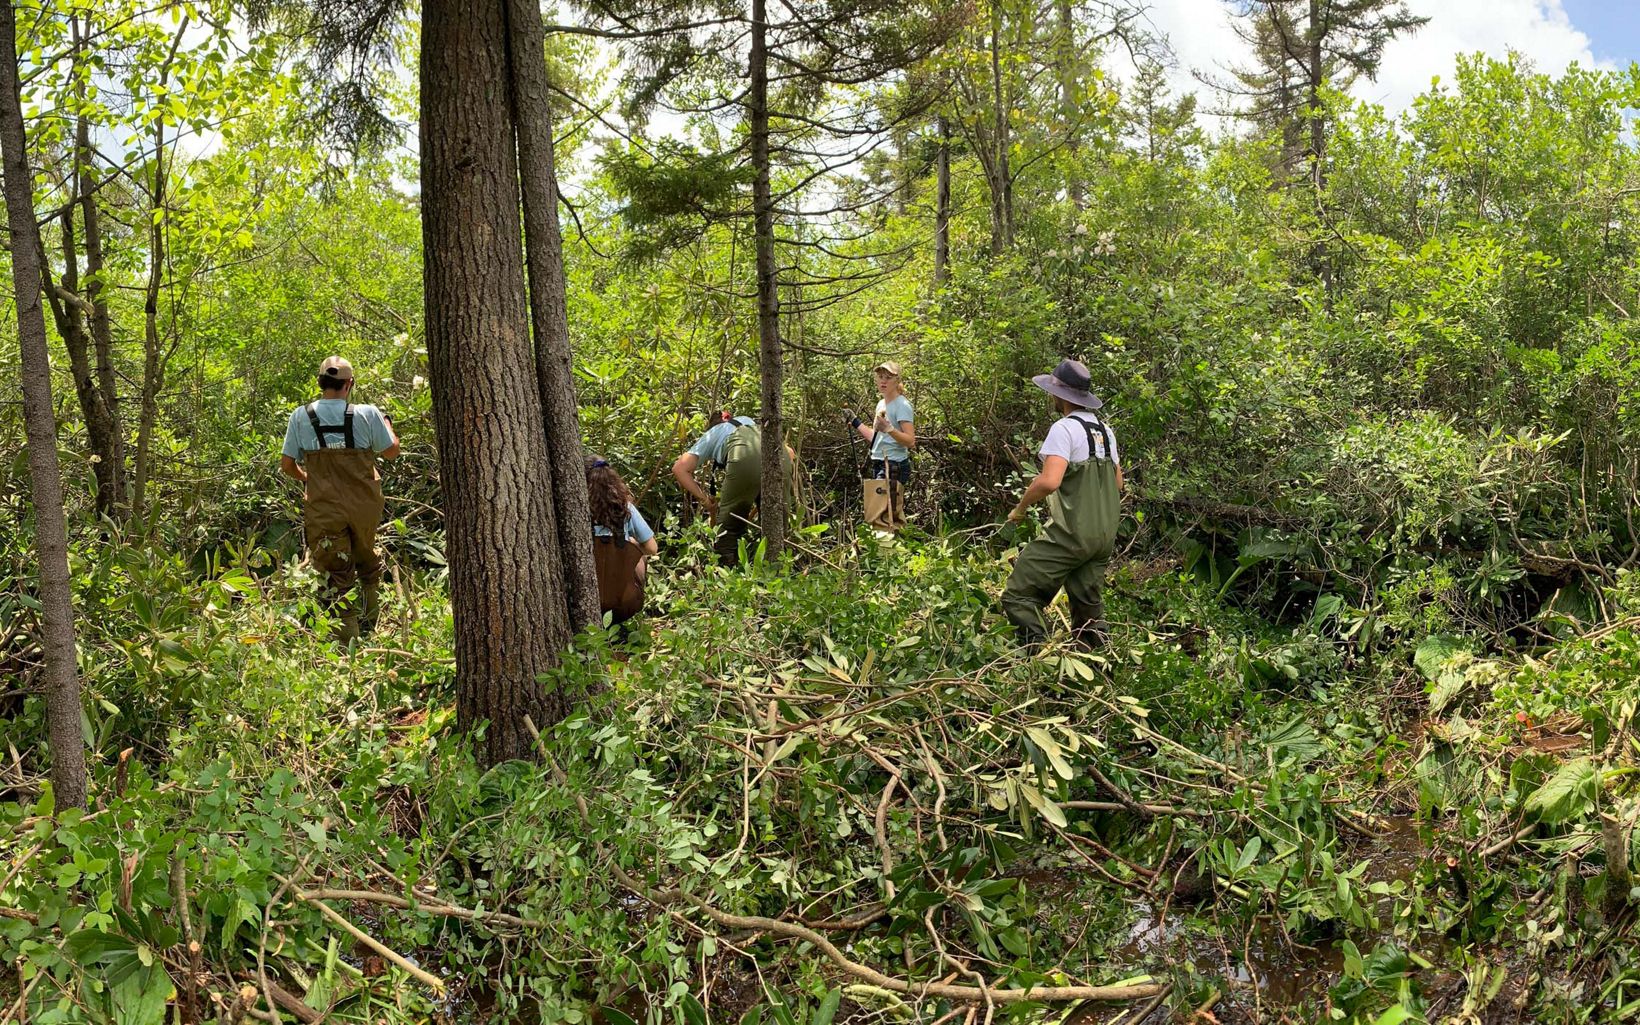 LEAF Interns held clear undergrowth from a stand of larch trees at Maryland's Finzel Swamp Preserve.